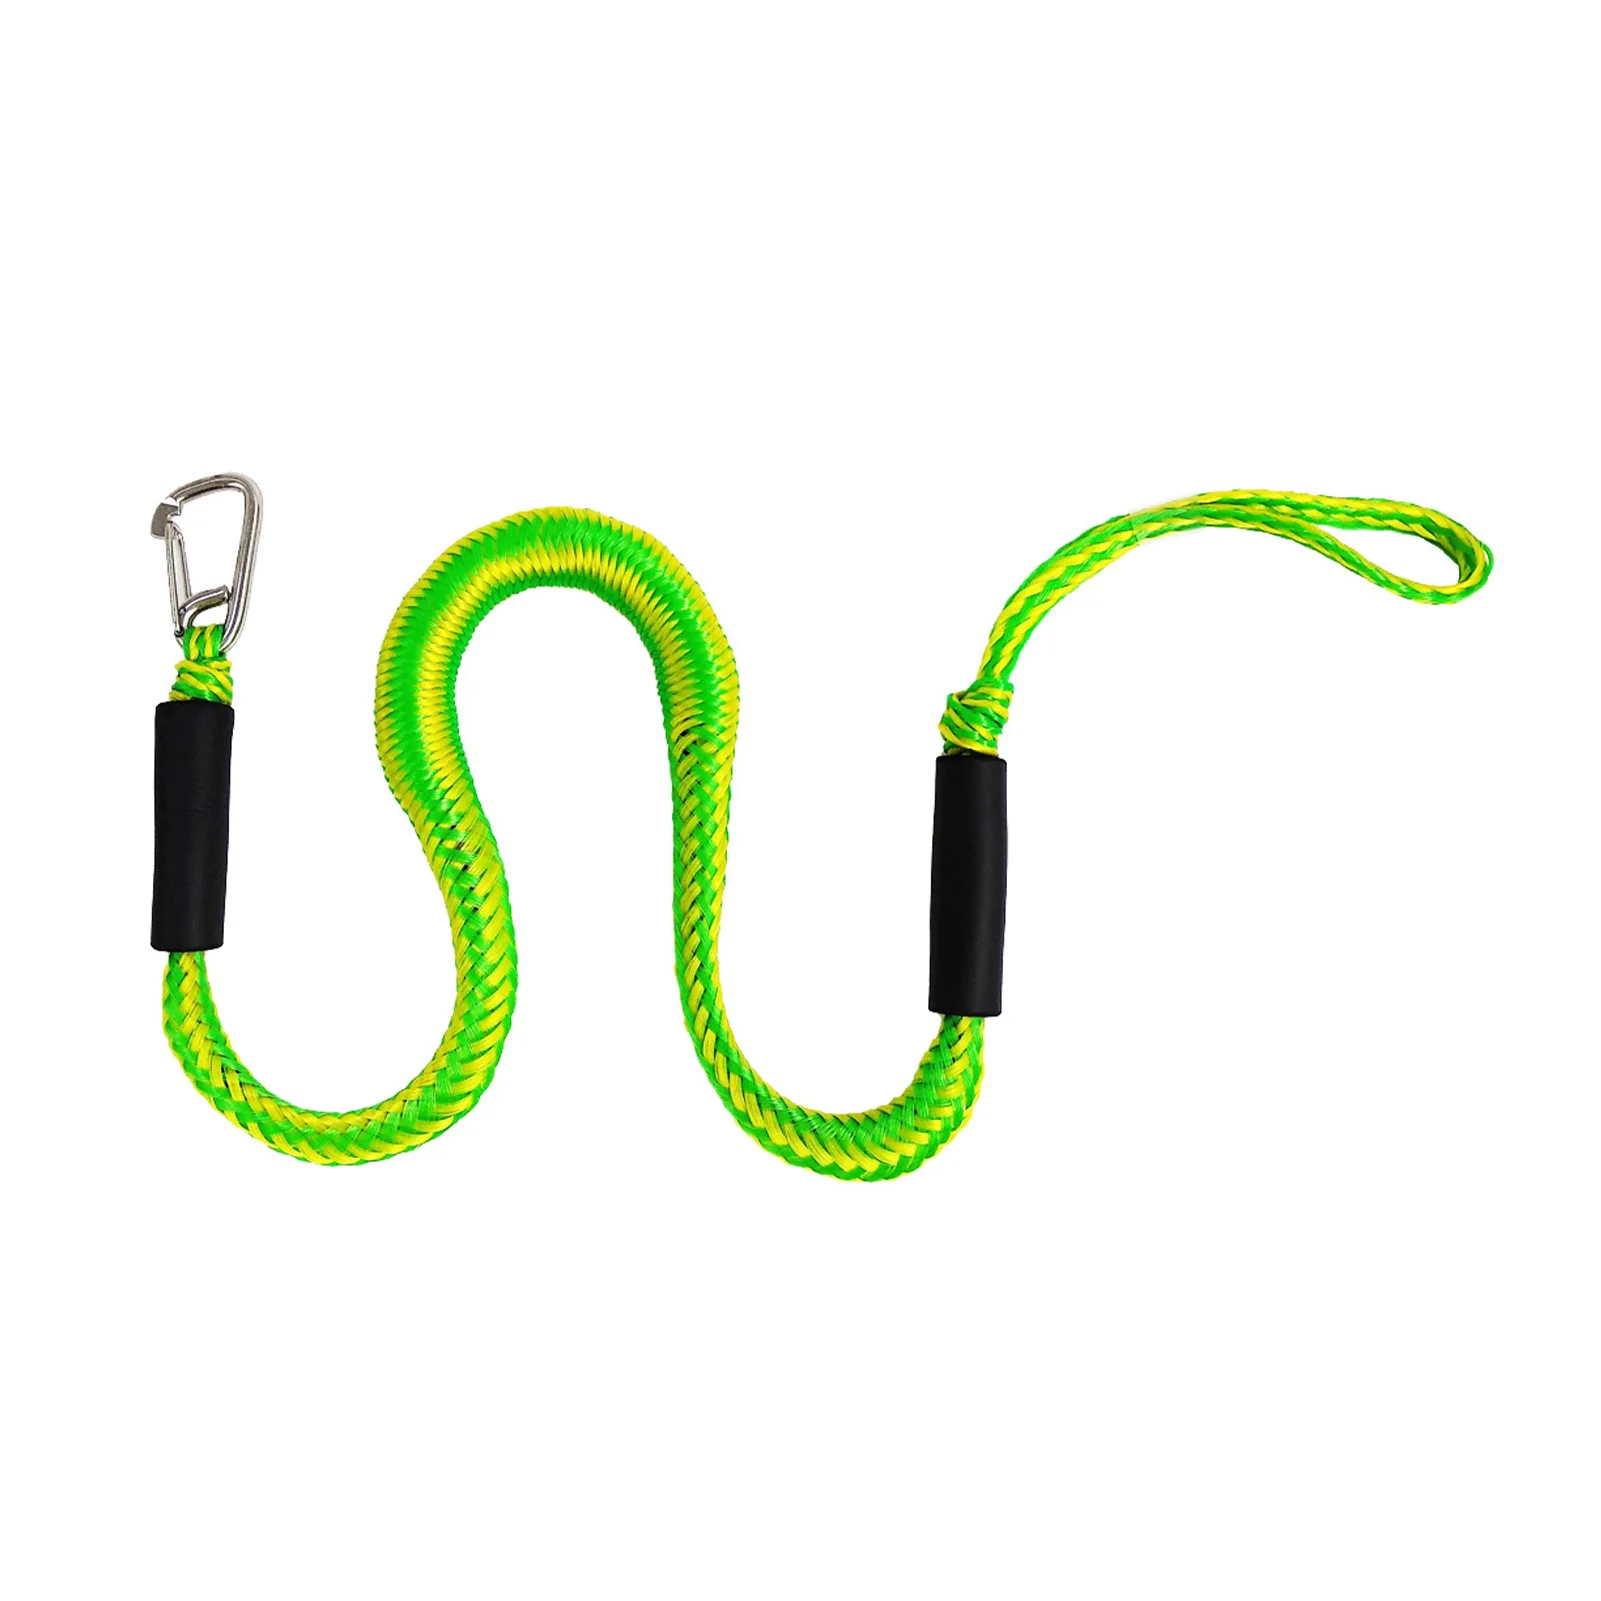 Skiing With Hook Mooring Rope Rafting Latex Anchoring PE Stretch Absorbs Shock Outdoor Bungee Dock Line Kayak For Boat